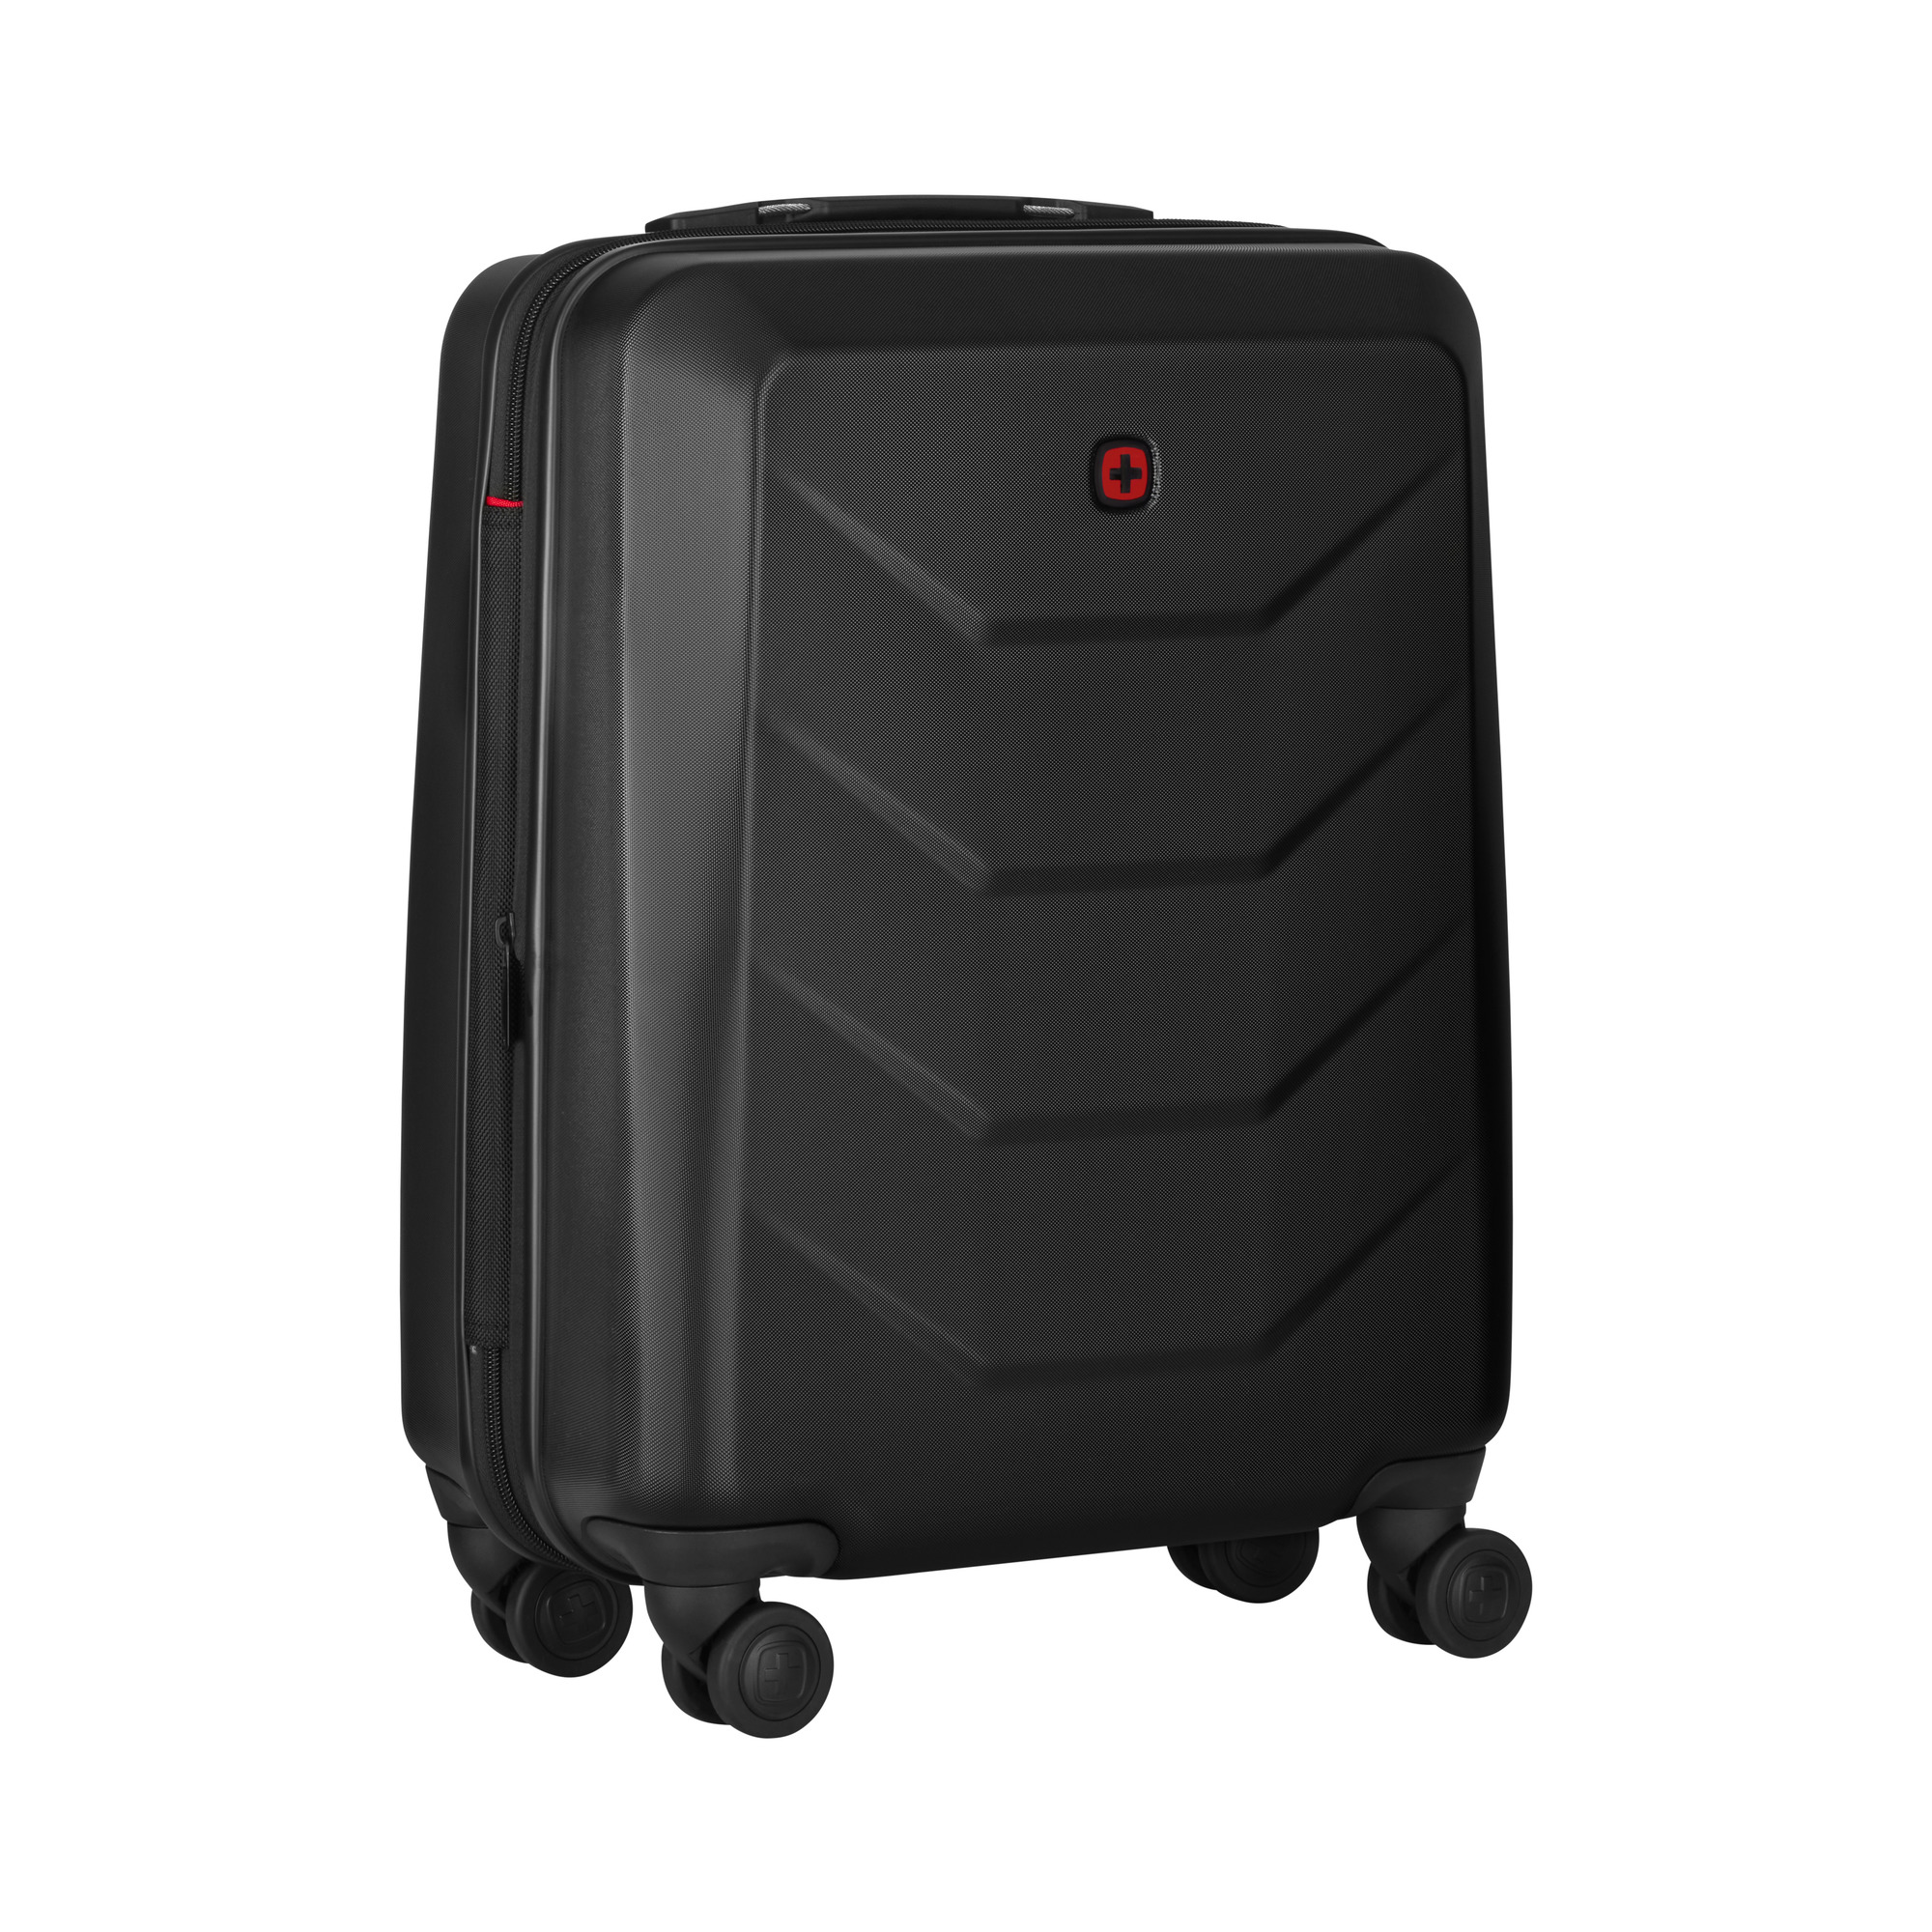 Wenger Prymo Carry-On